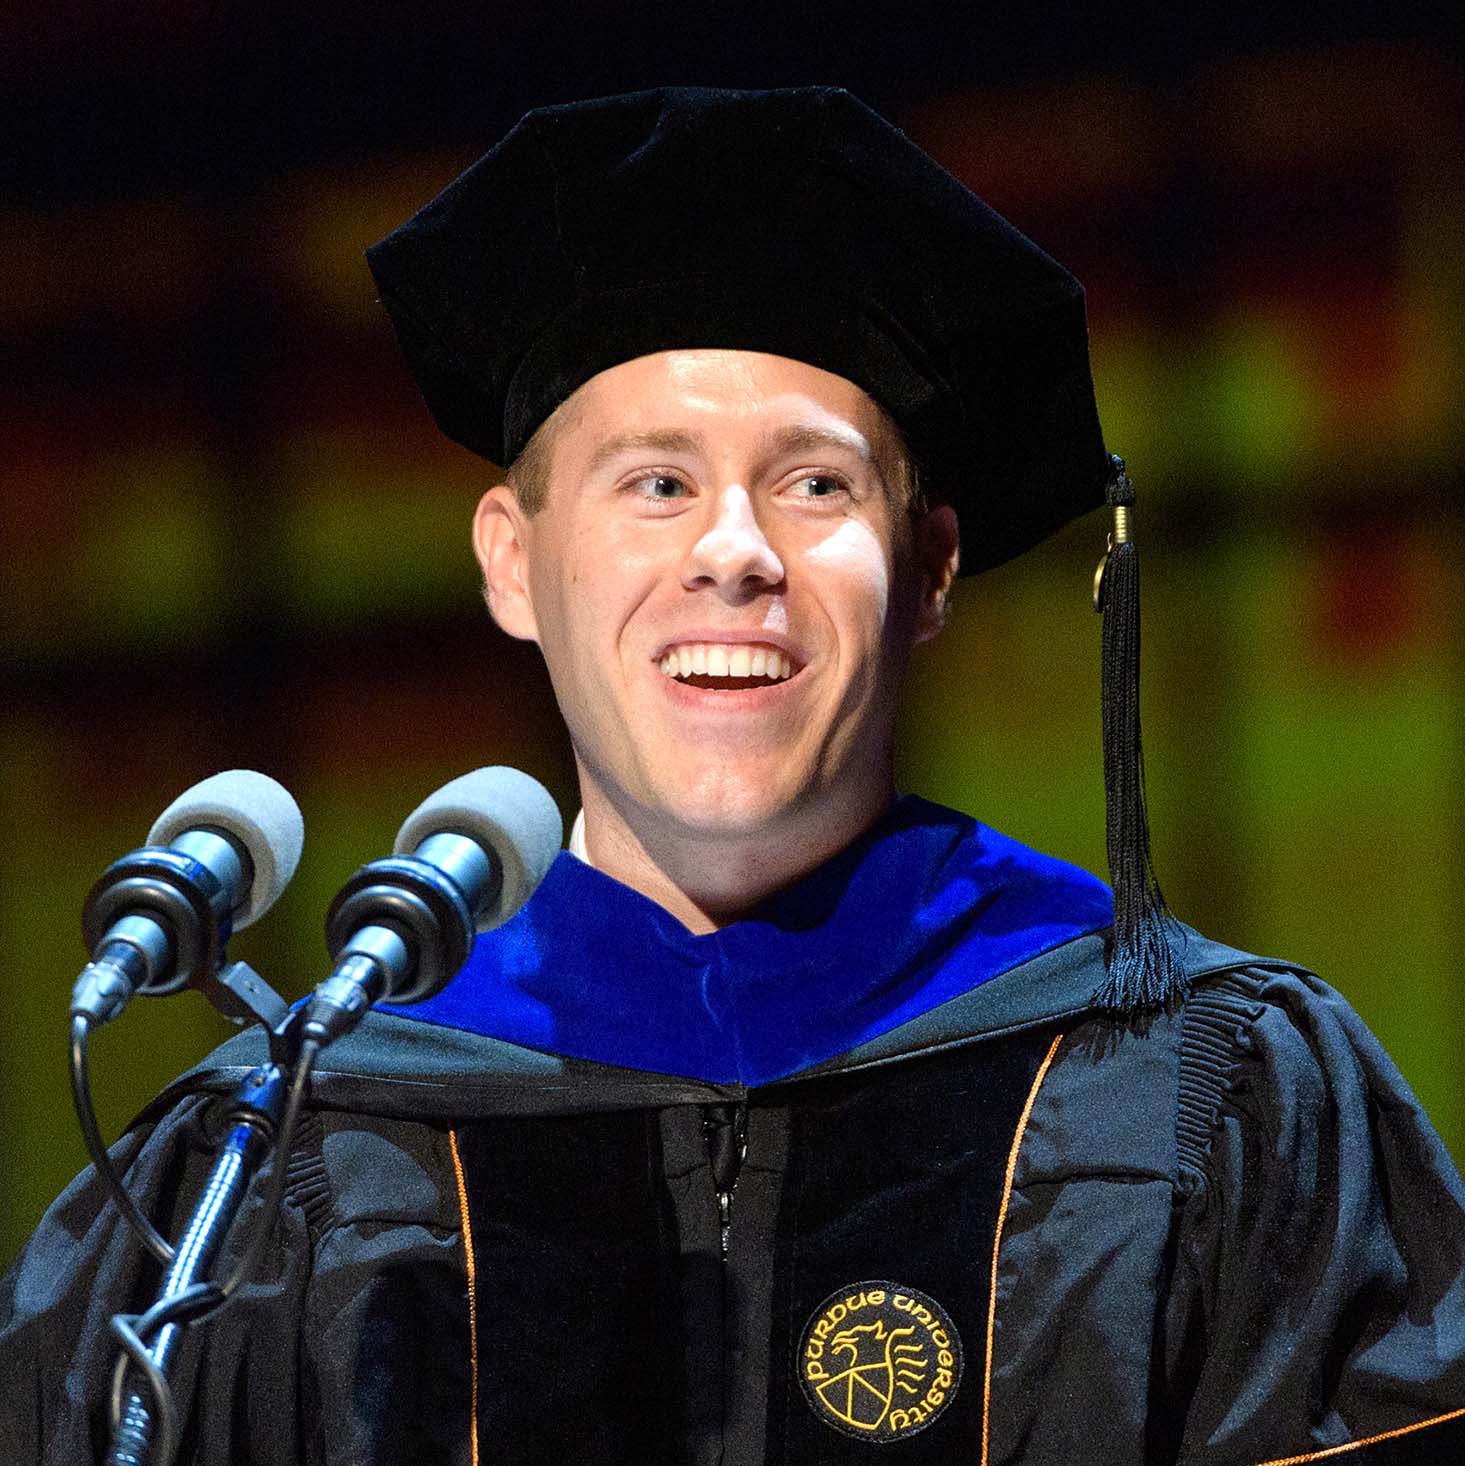 glowing-adjectives-describe-purdue-student-leader-commencement